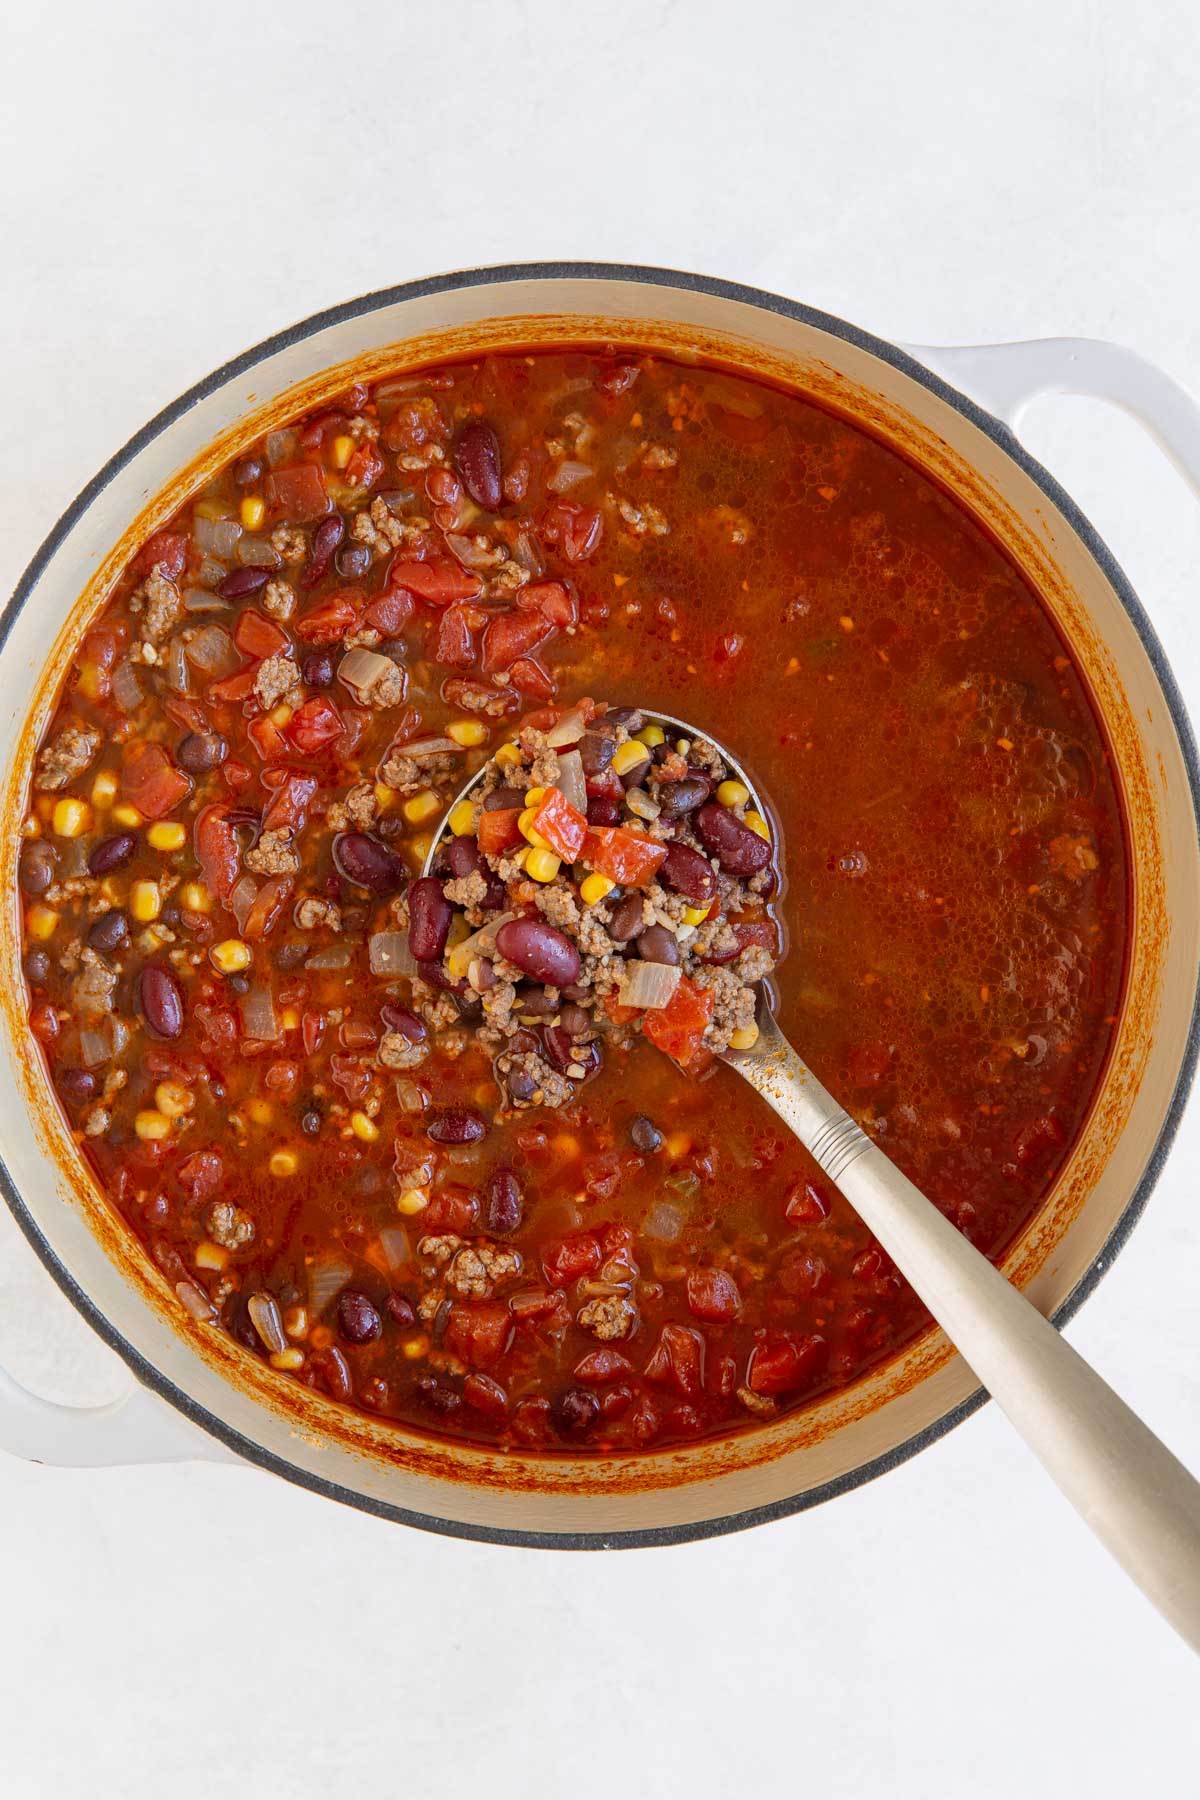 Overhead view of a ladle ladling taco soup from a white Dutch oven.